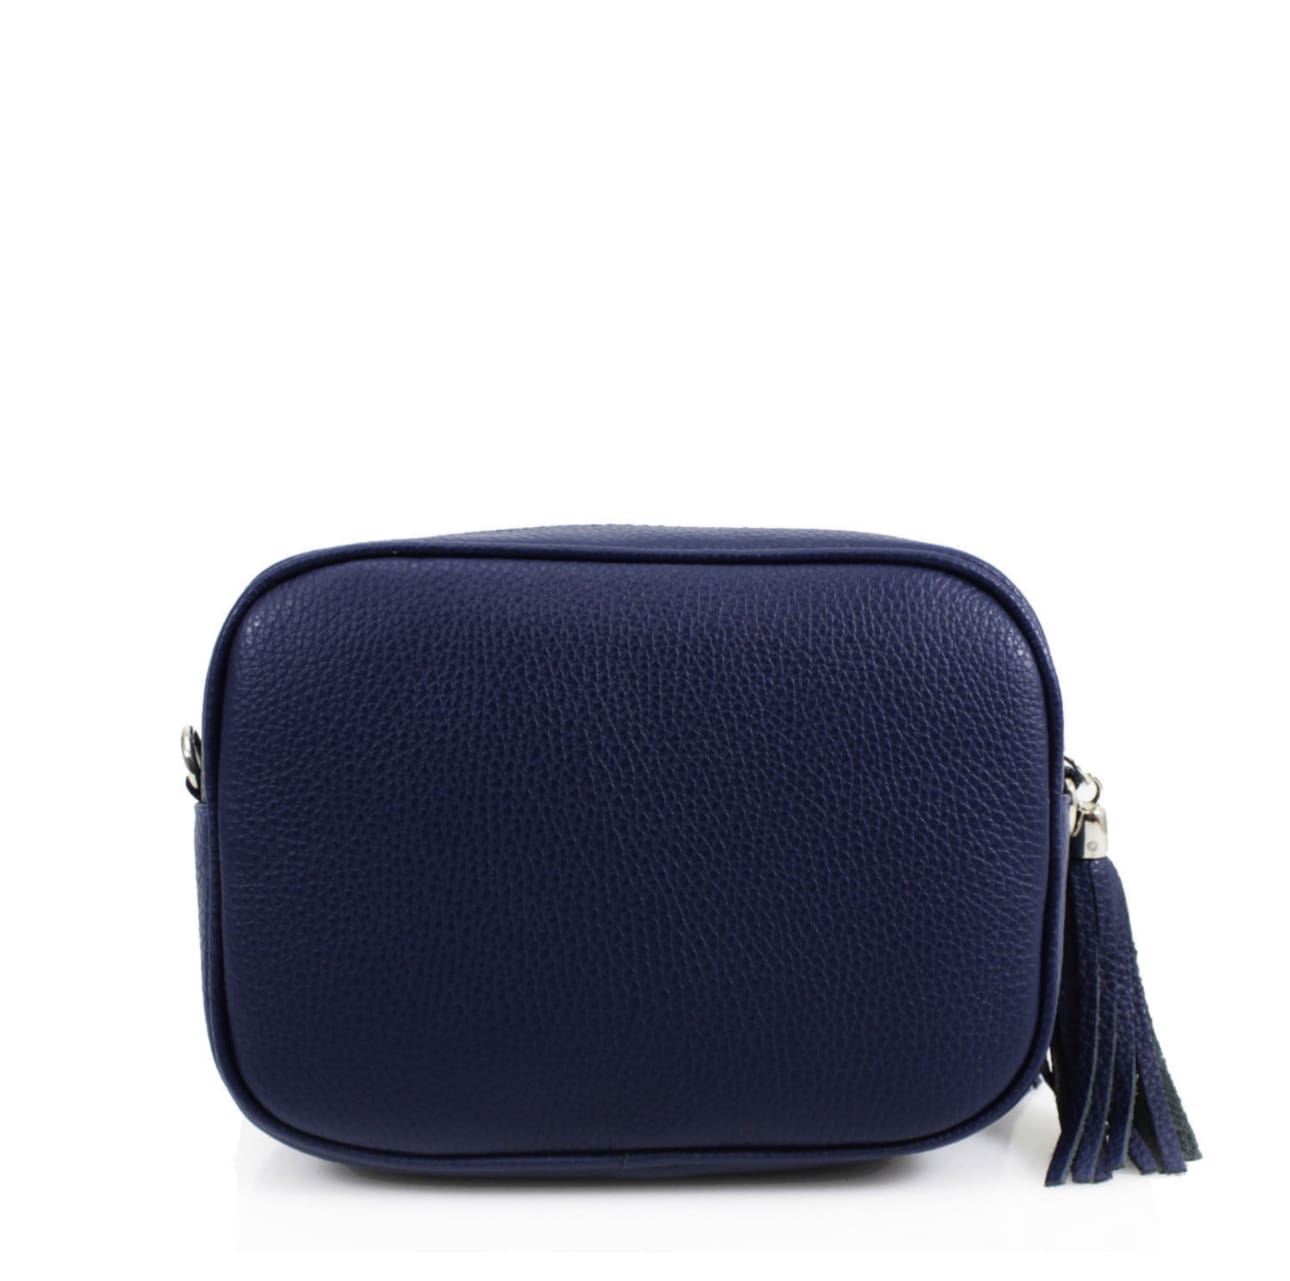 The navy leather cross body bag with tassel.